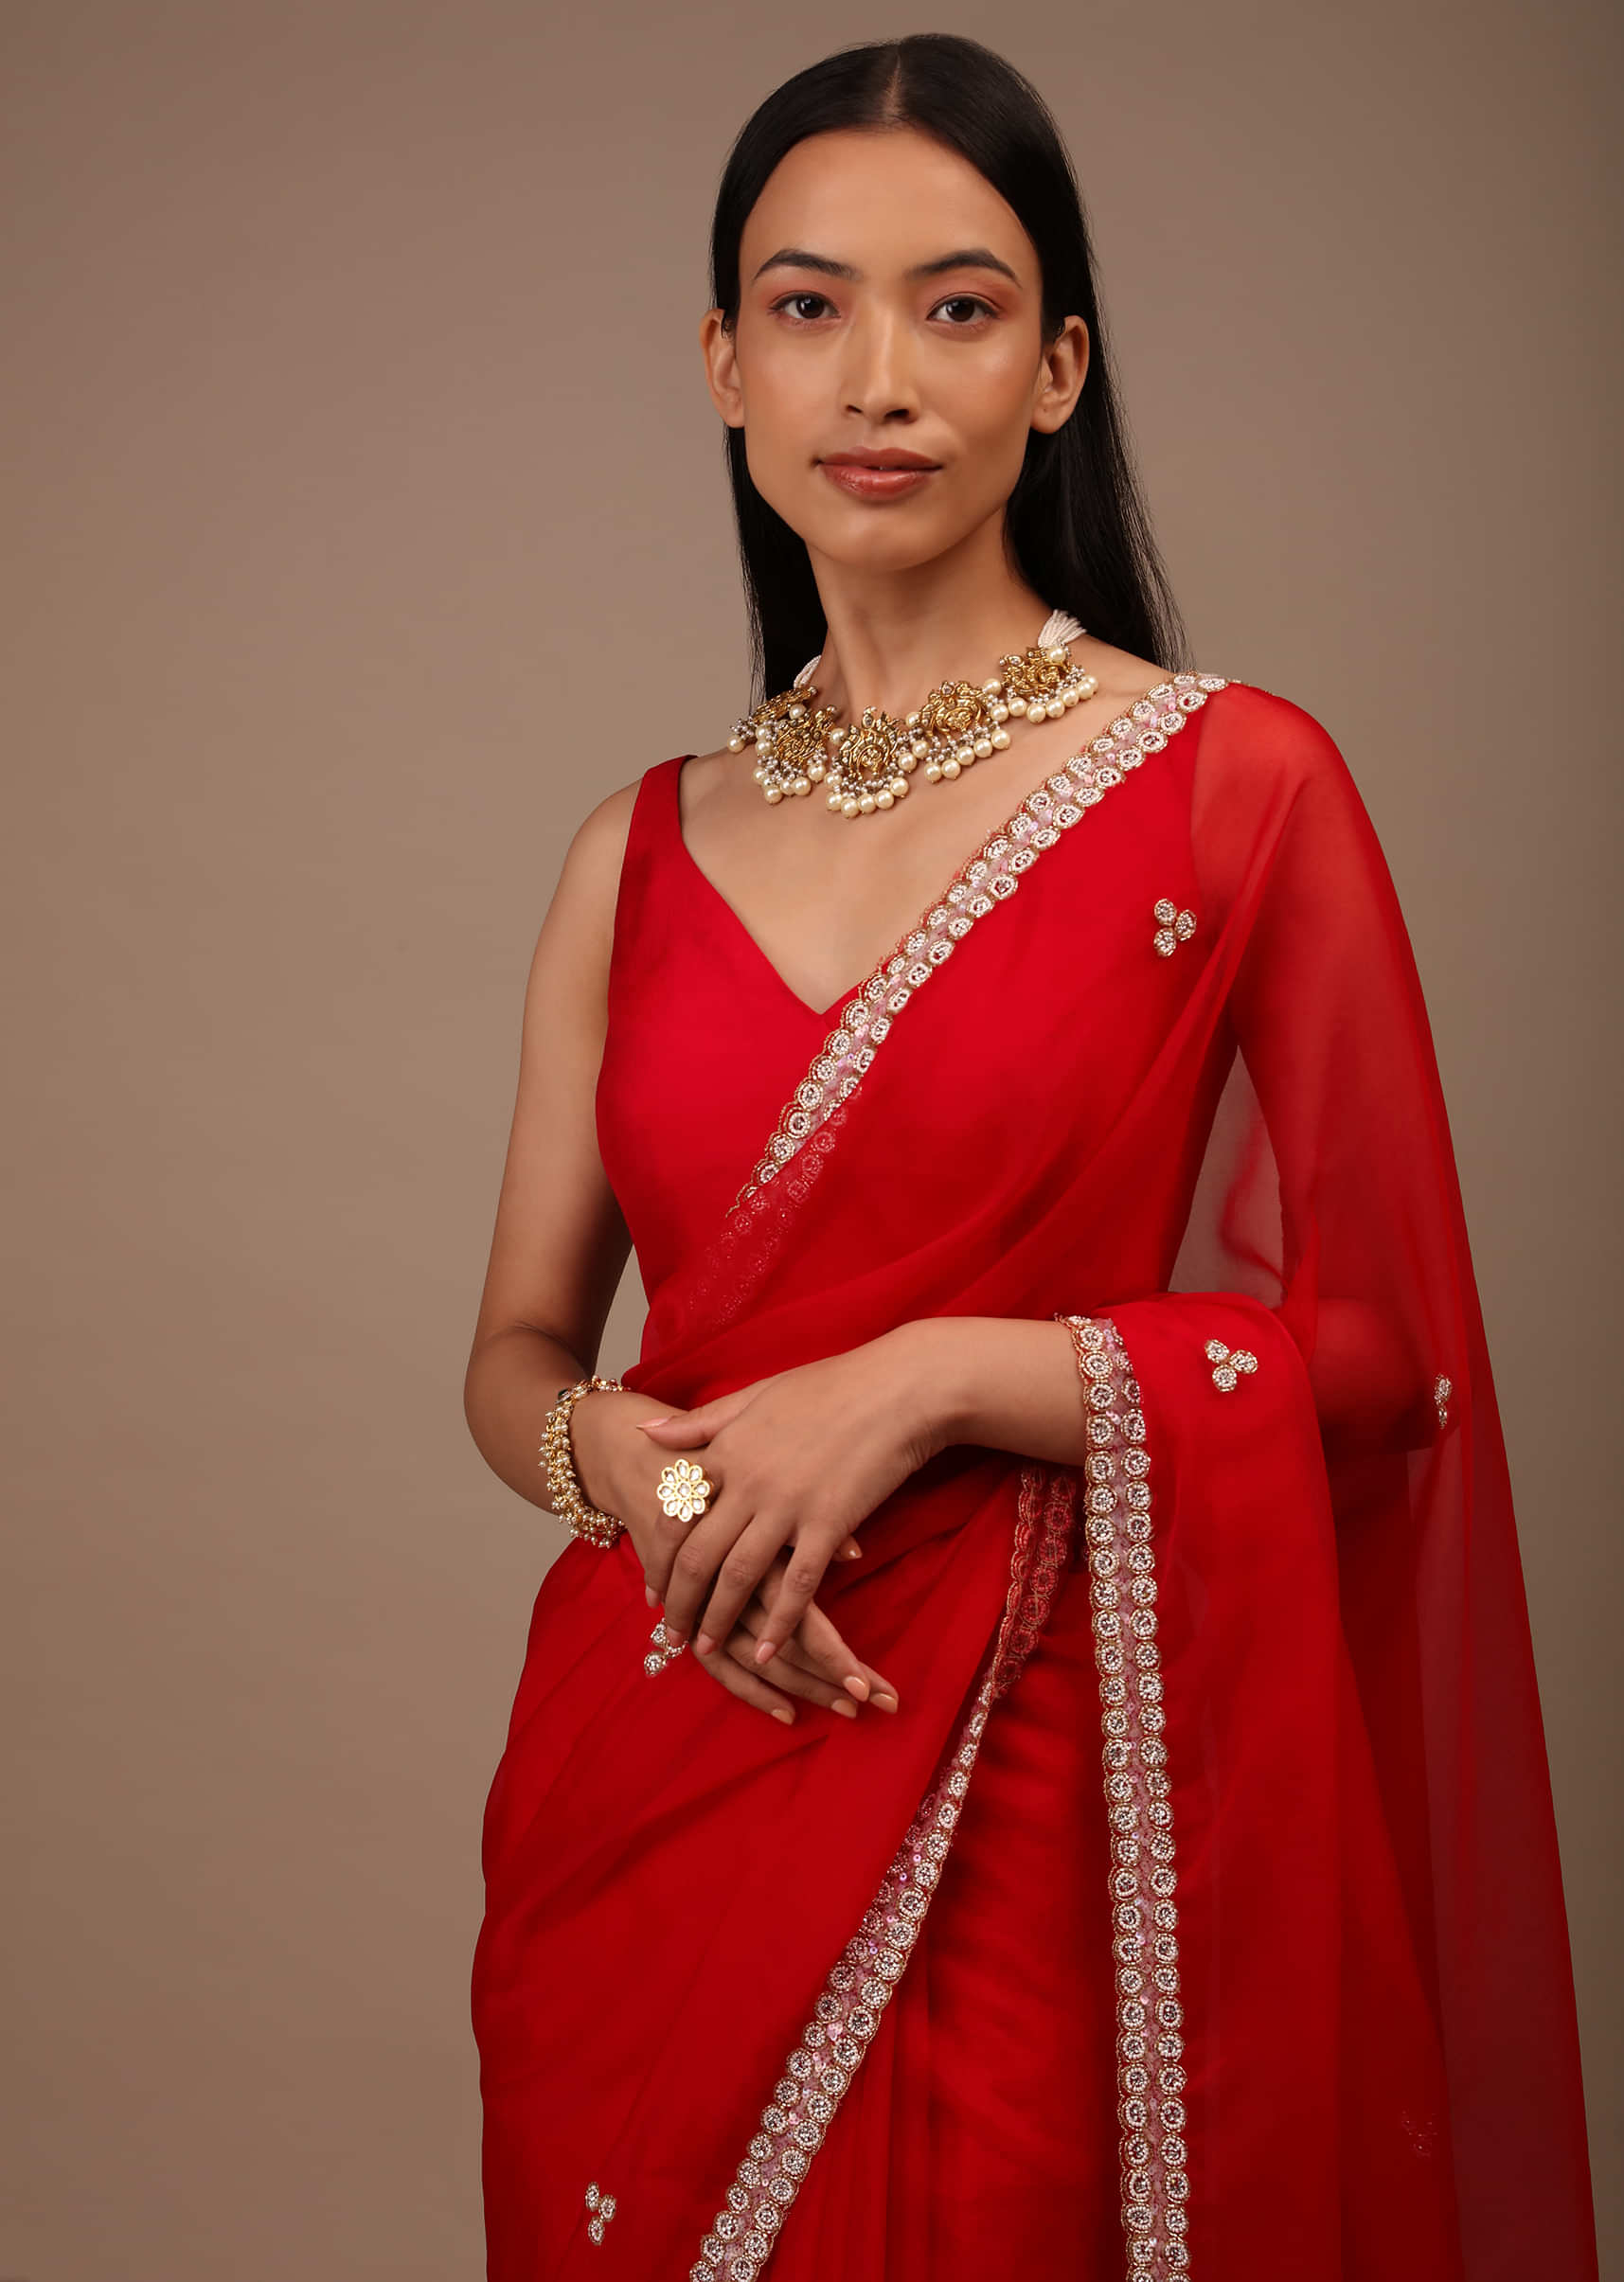 Red Saree In Organza With Hand Embellished Cut Dana And Moti Detailing On The Border